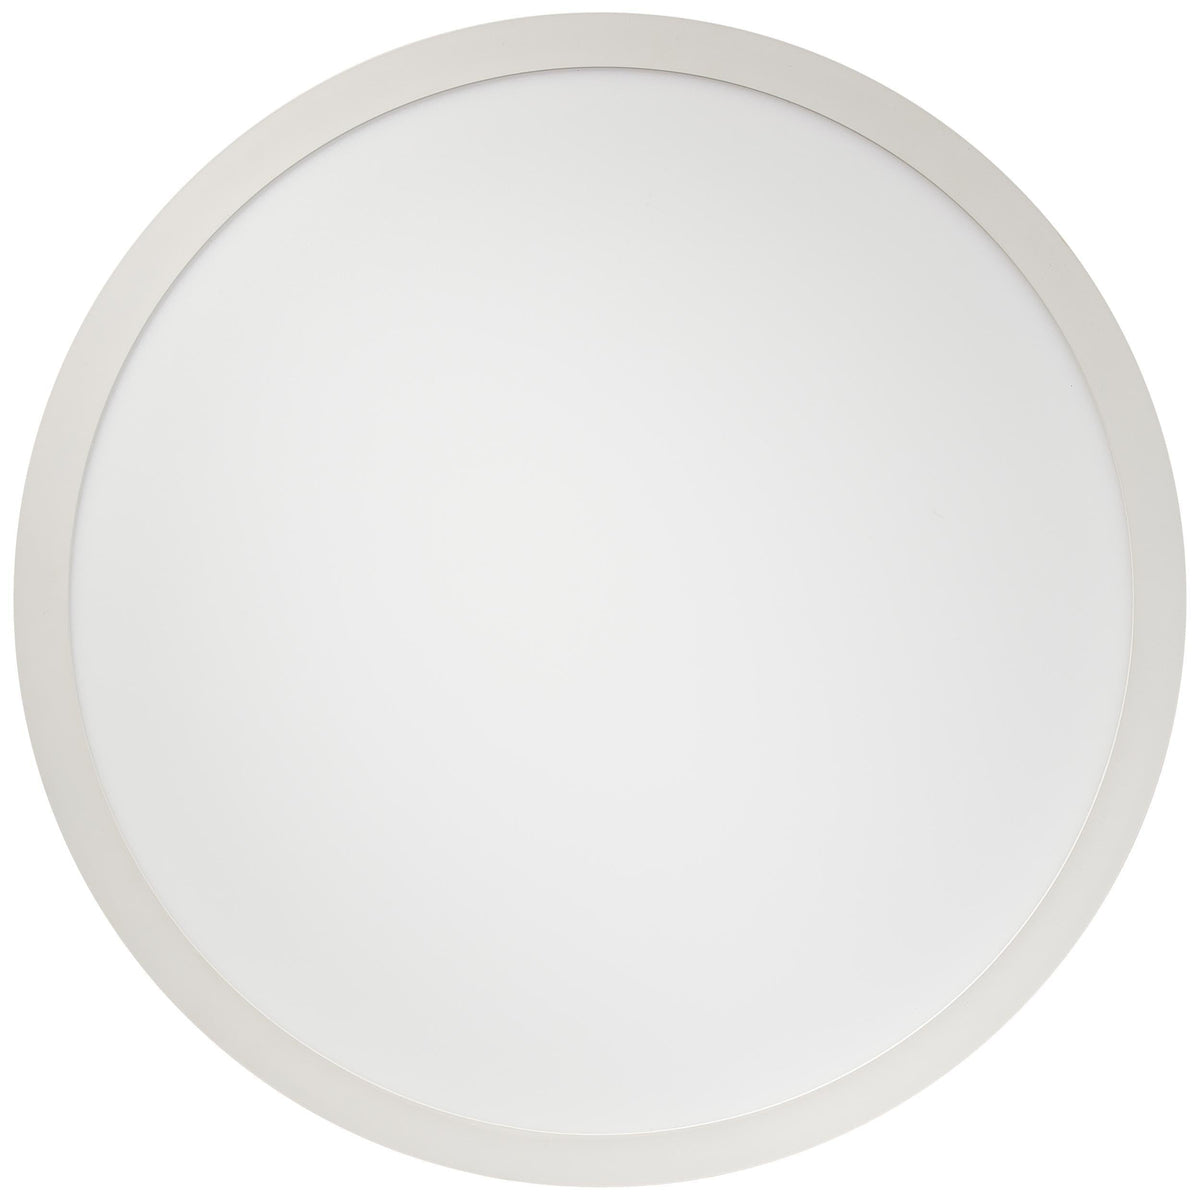 Brilliant 1 Light 40W Abie LED Round Ceiling Panel - White | G97061/05 from DID Electrical - guaranteed Irish, guaranteed quality service. (6977602945212)